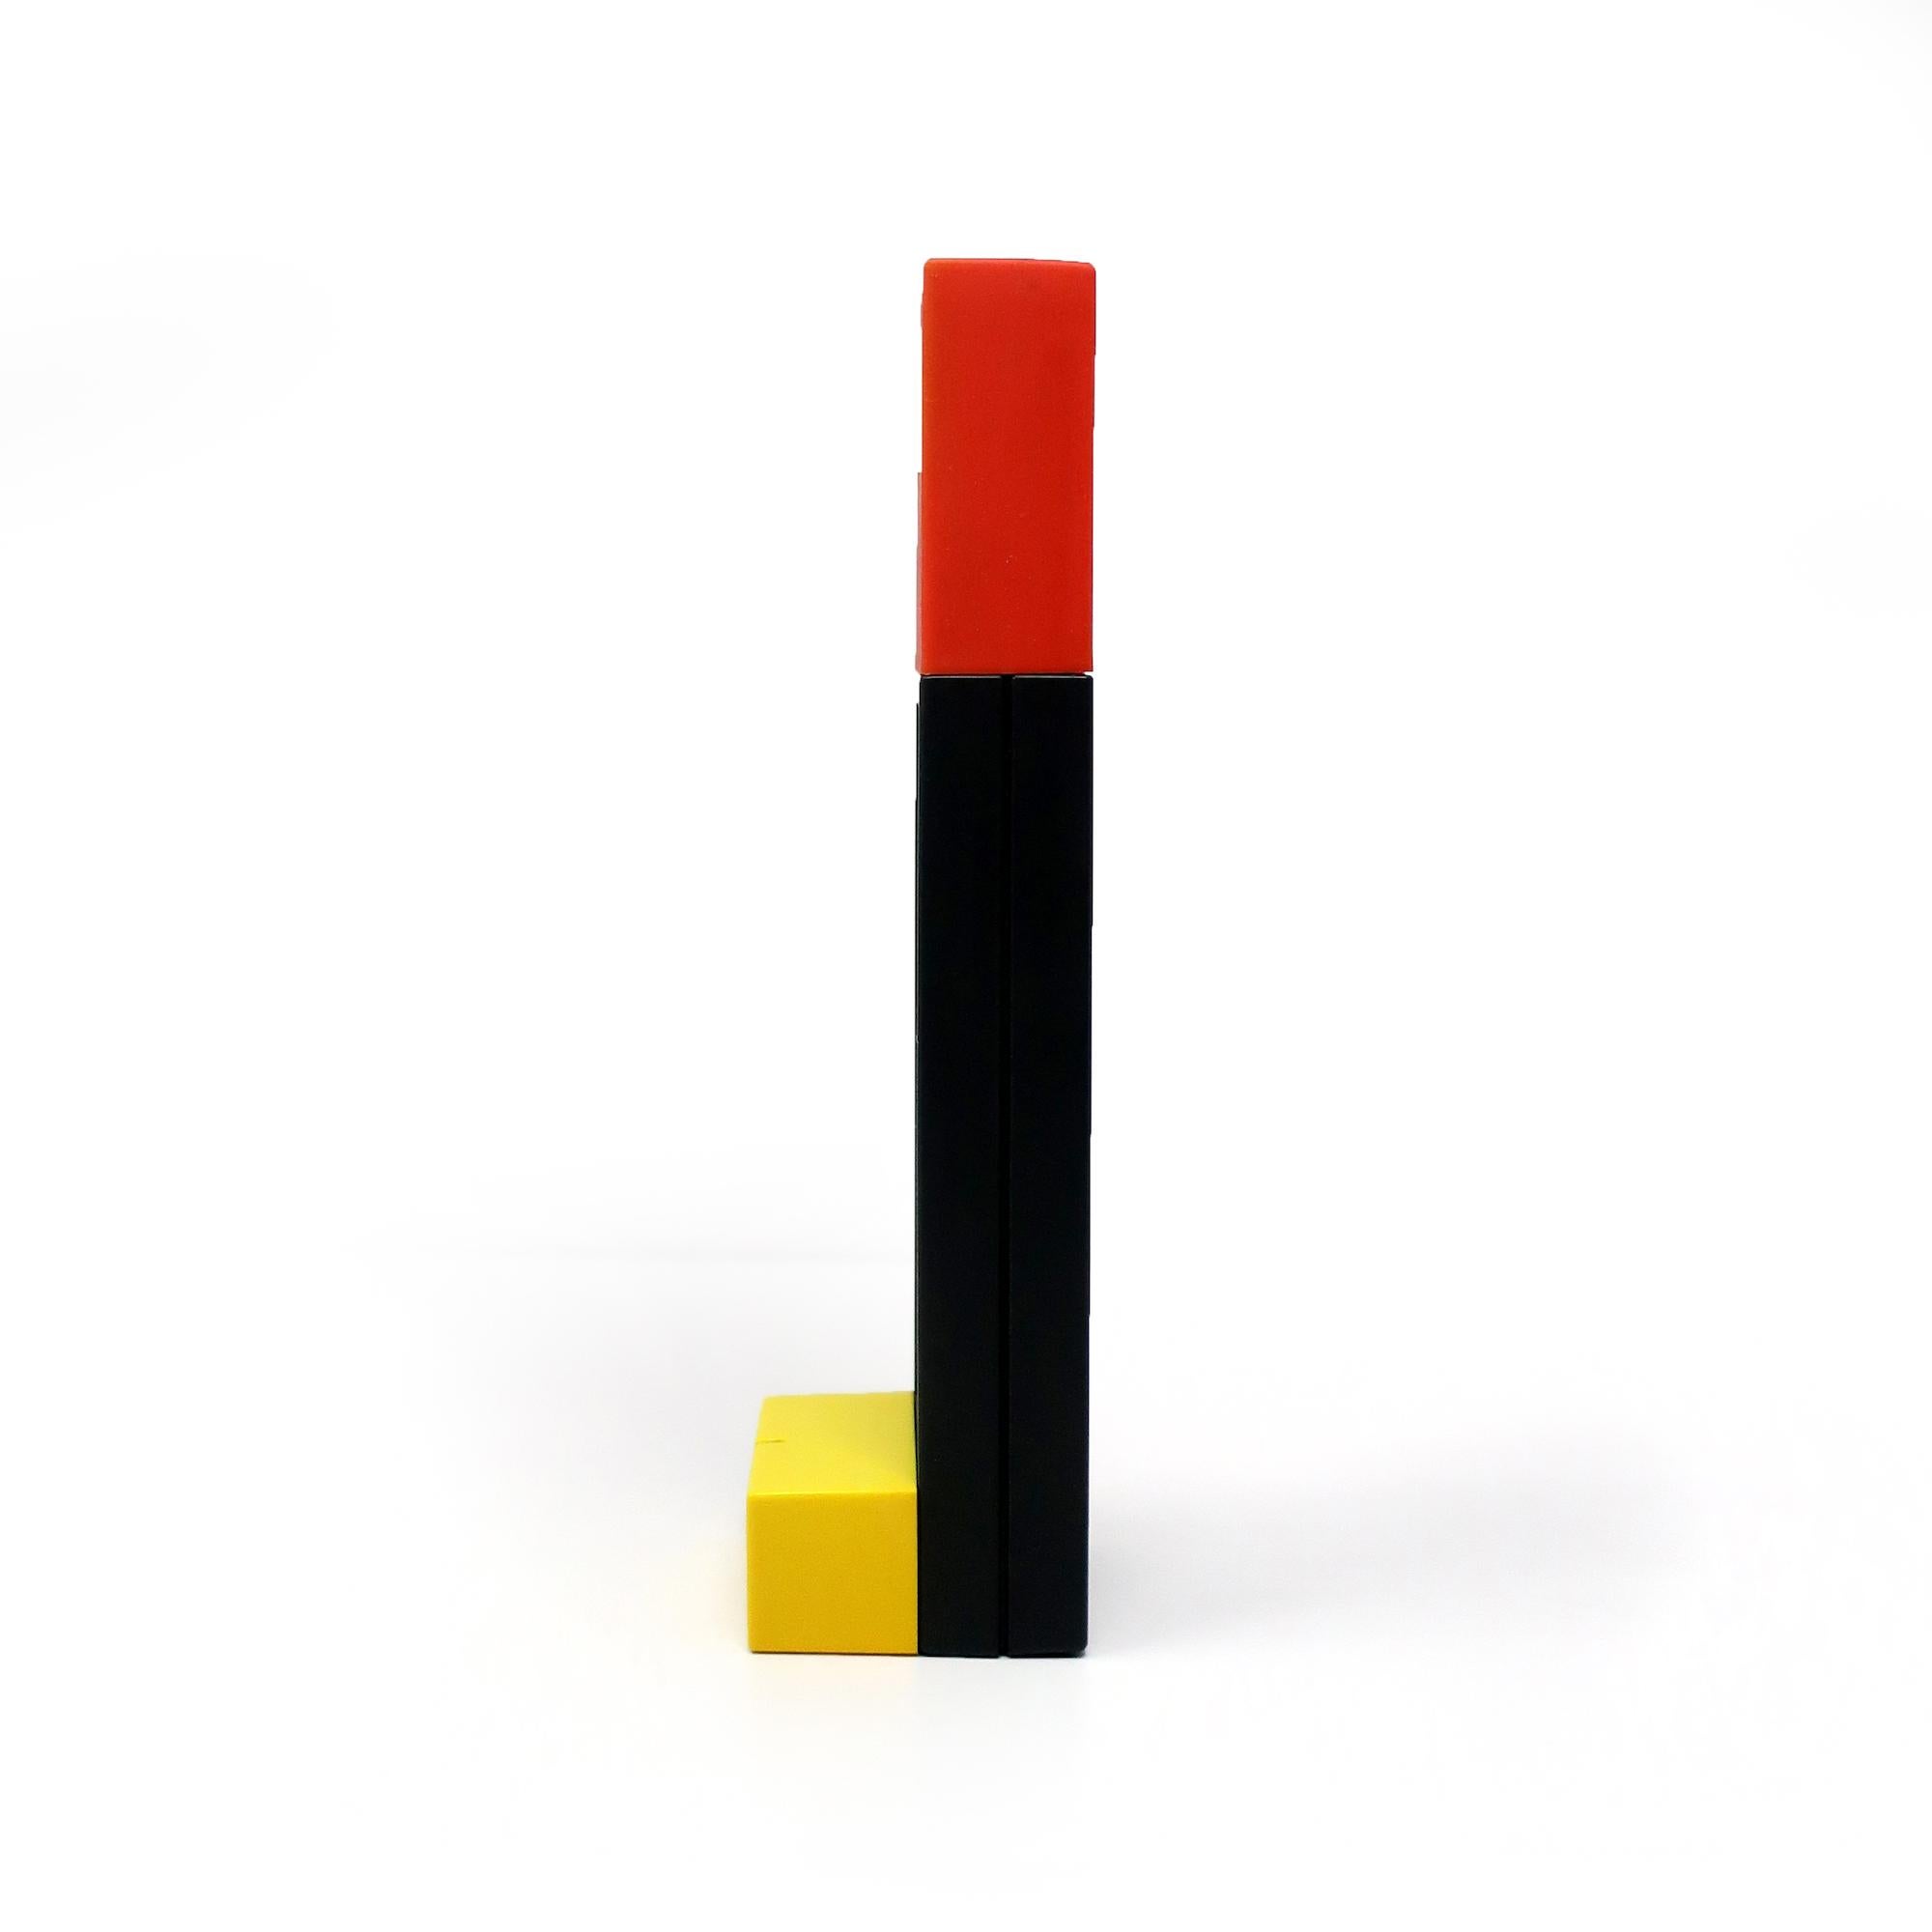 1986 Enorme Telephone Handset by Ettore Sottsass In Fair Condition For Sale In Brooklyn, NY